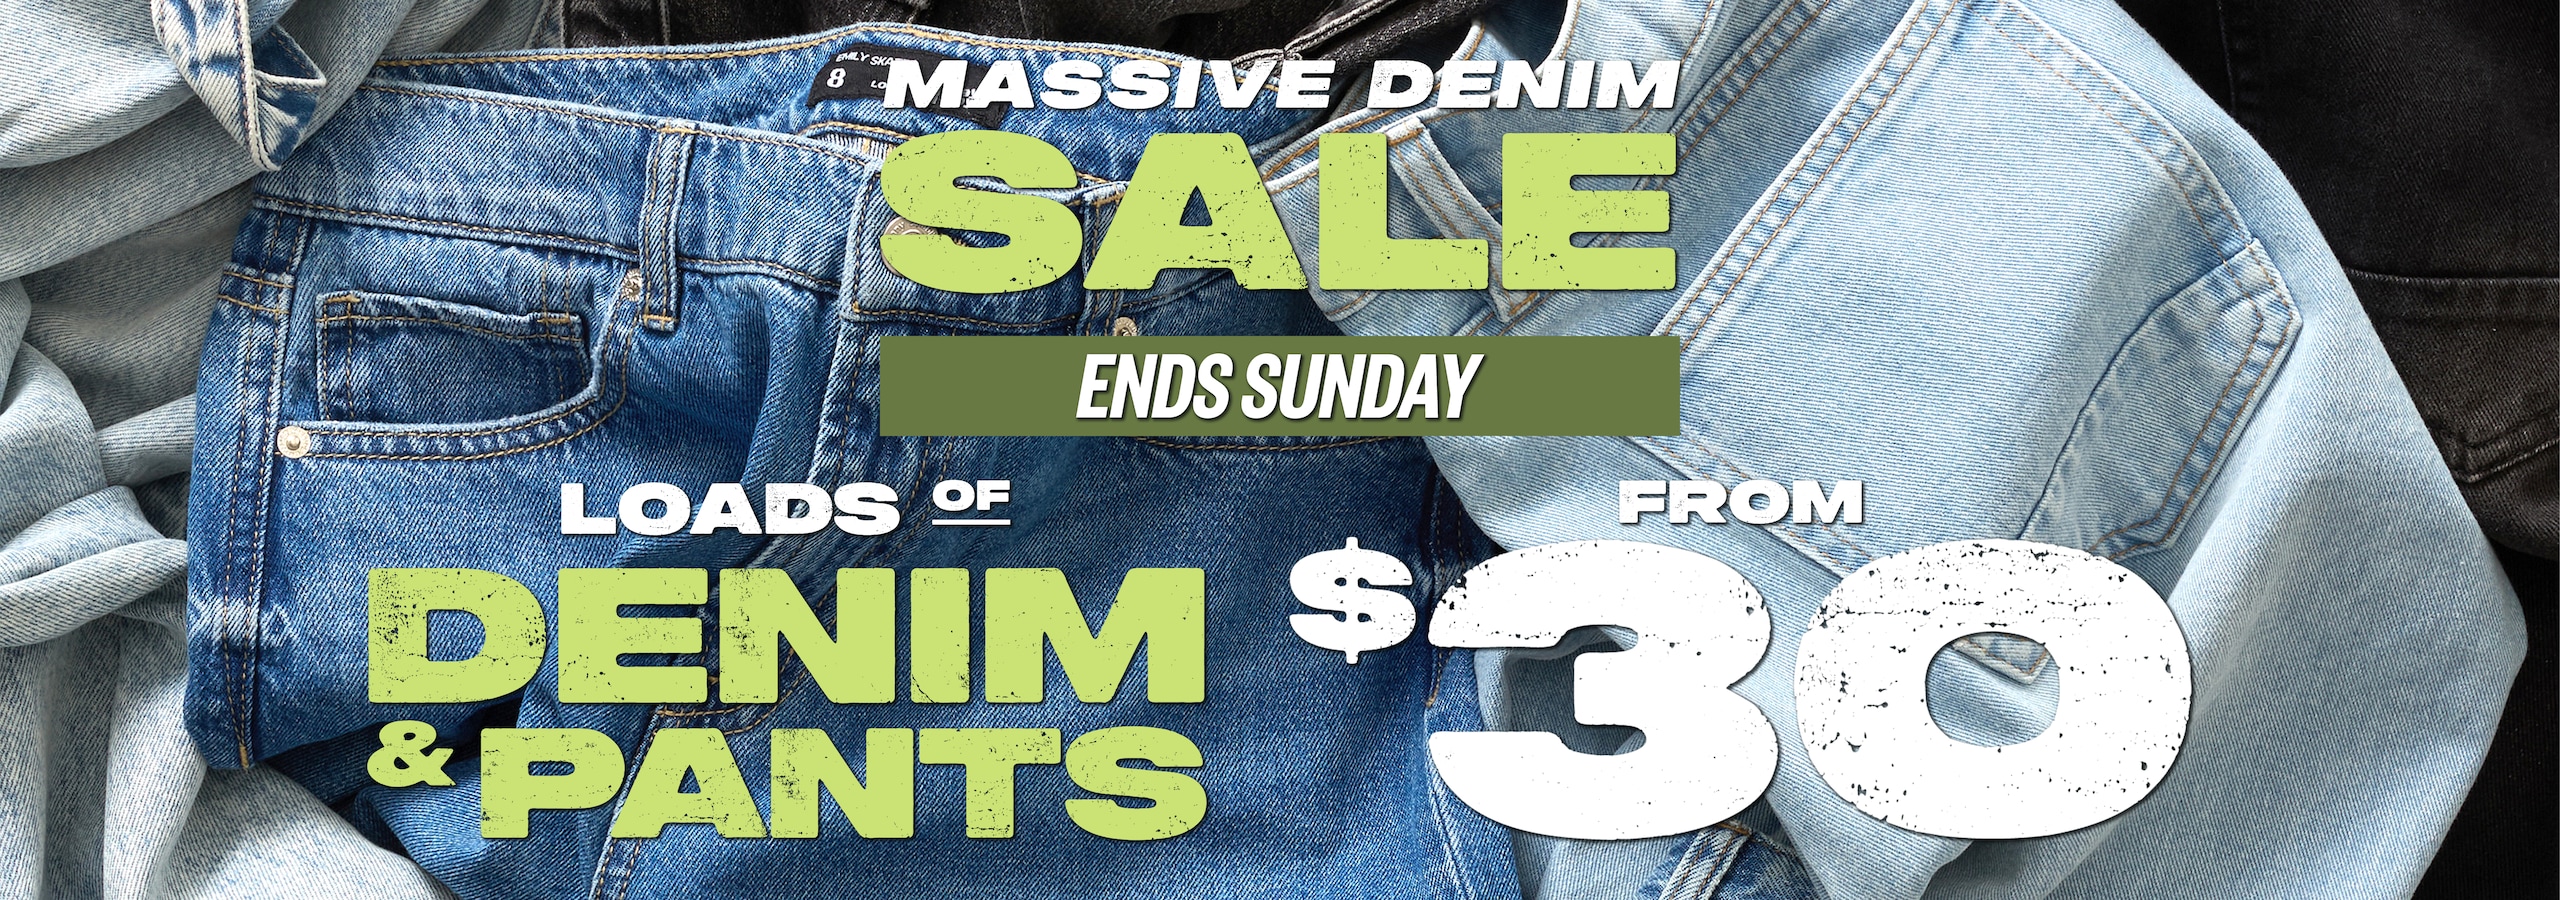 Massive Sale. Loads of Denim & Pants from $30. + Online Only, Ends Thursday. 25% Off All Full Price.